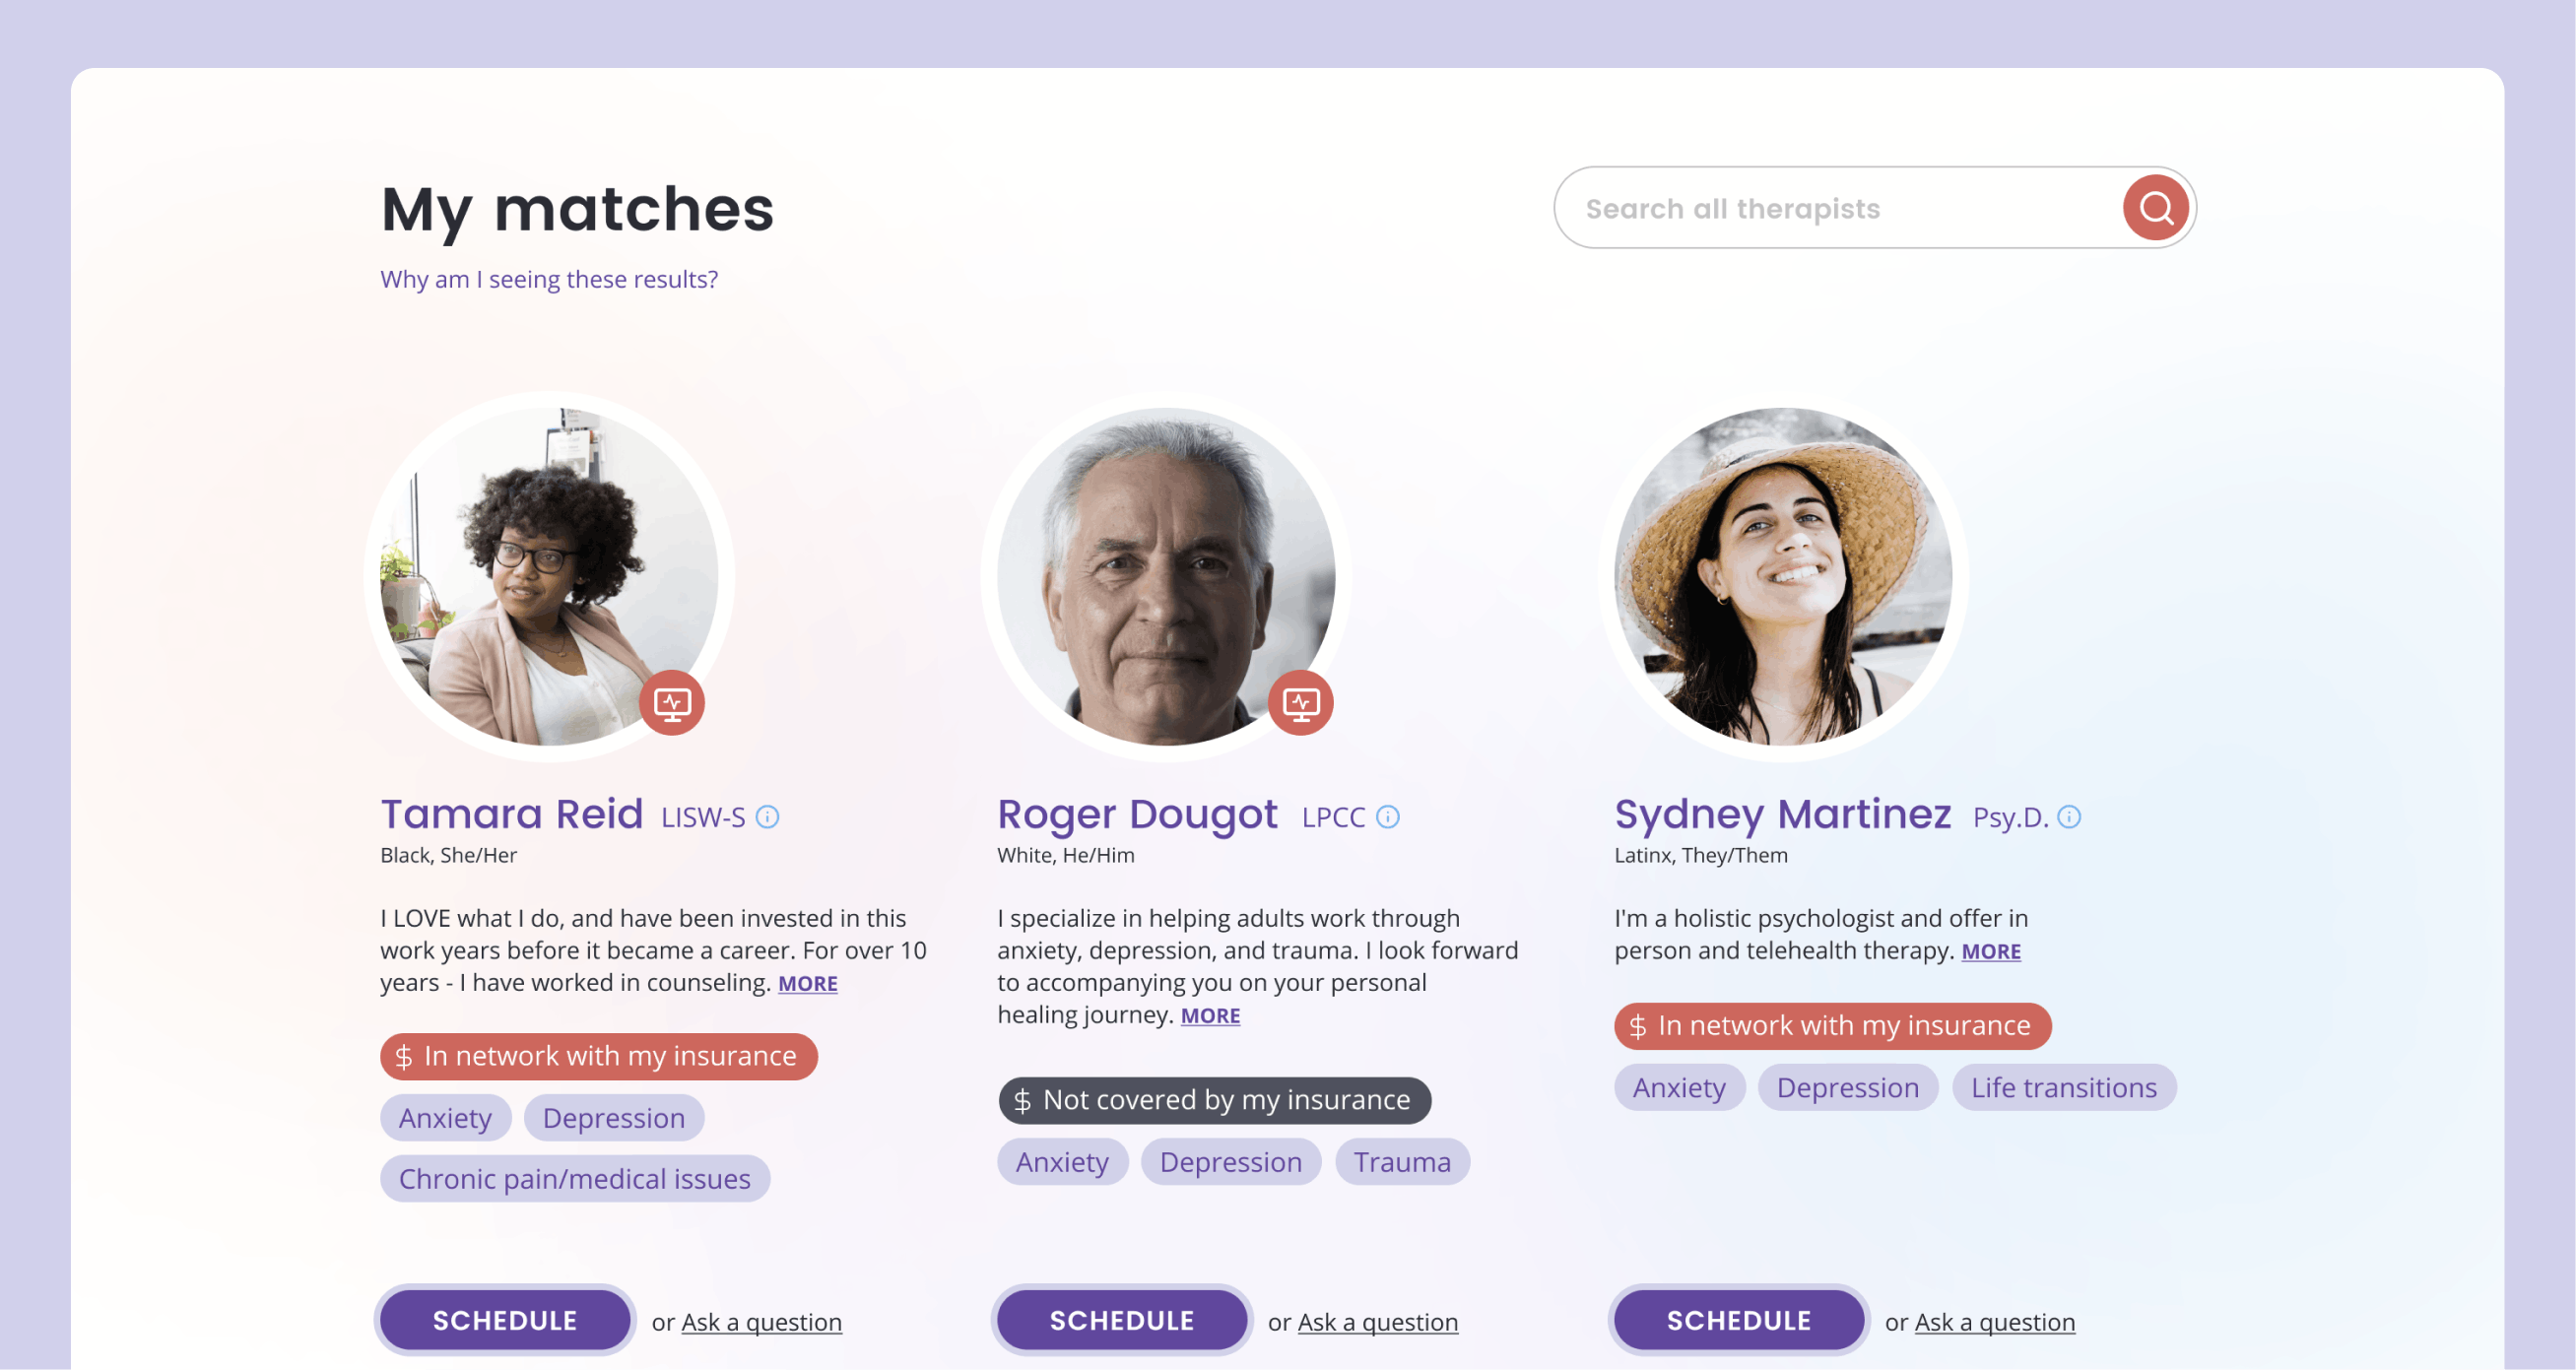 A webpage titled "My matches," displaying three therapist options. The therapists' names are Tamara Reid, Roger Dougot, and Sydney Martinez. Each therapist has credentials, race and pronouns, a description, insurance coverage, and treatment specialties listed. There is also an option to schedule an appointment for each therapist.